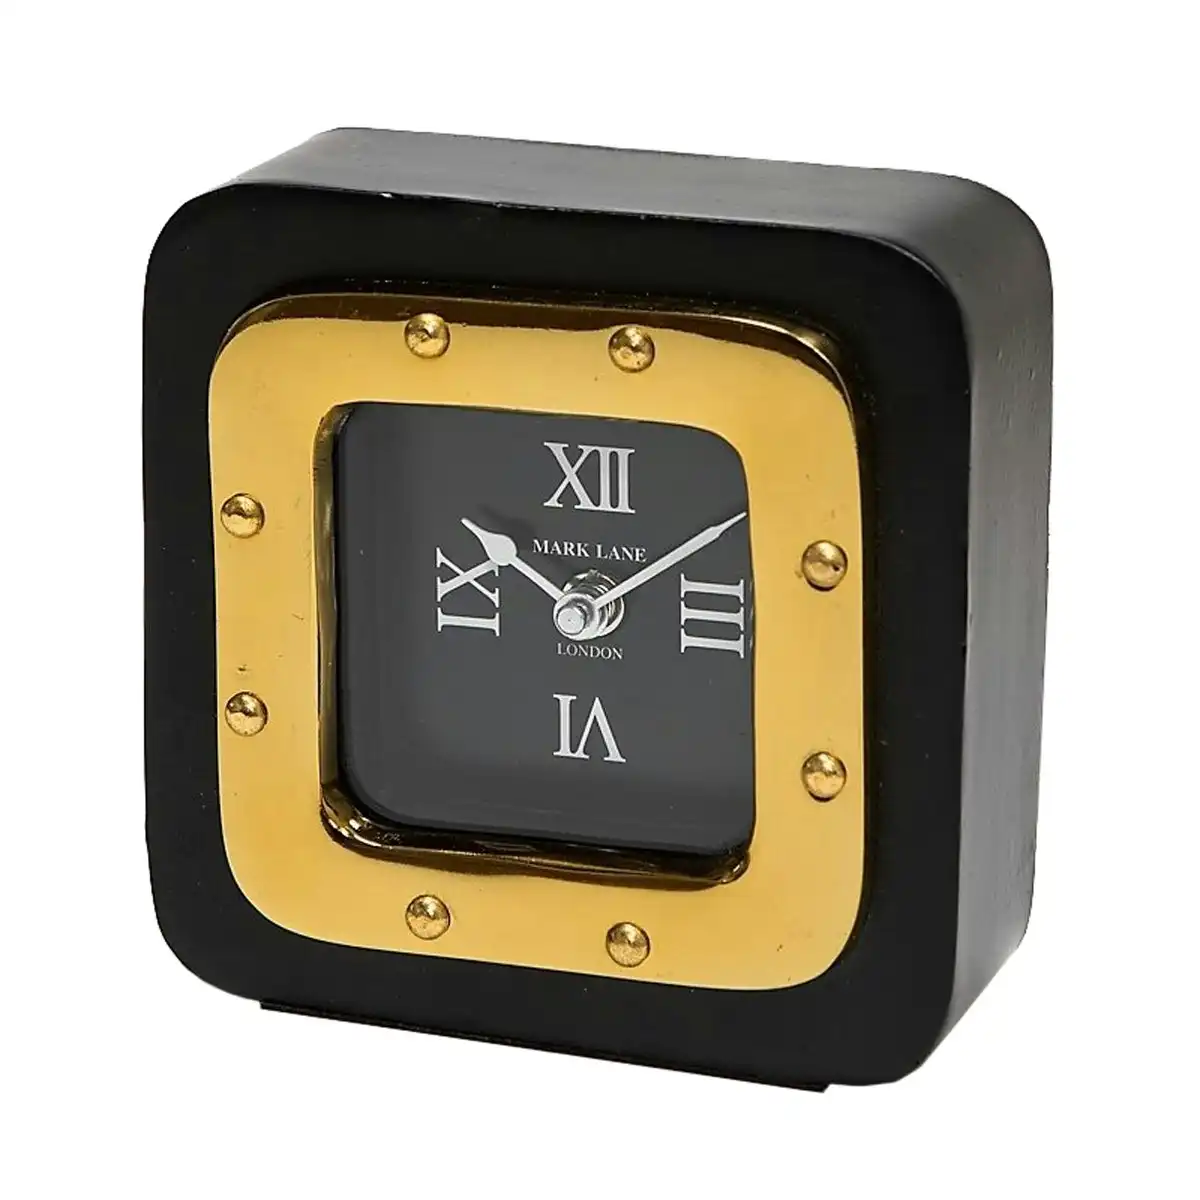 SSH Collection Retro Large Desk Clock - Black and Gold